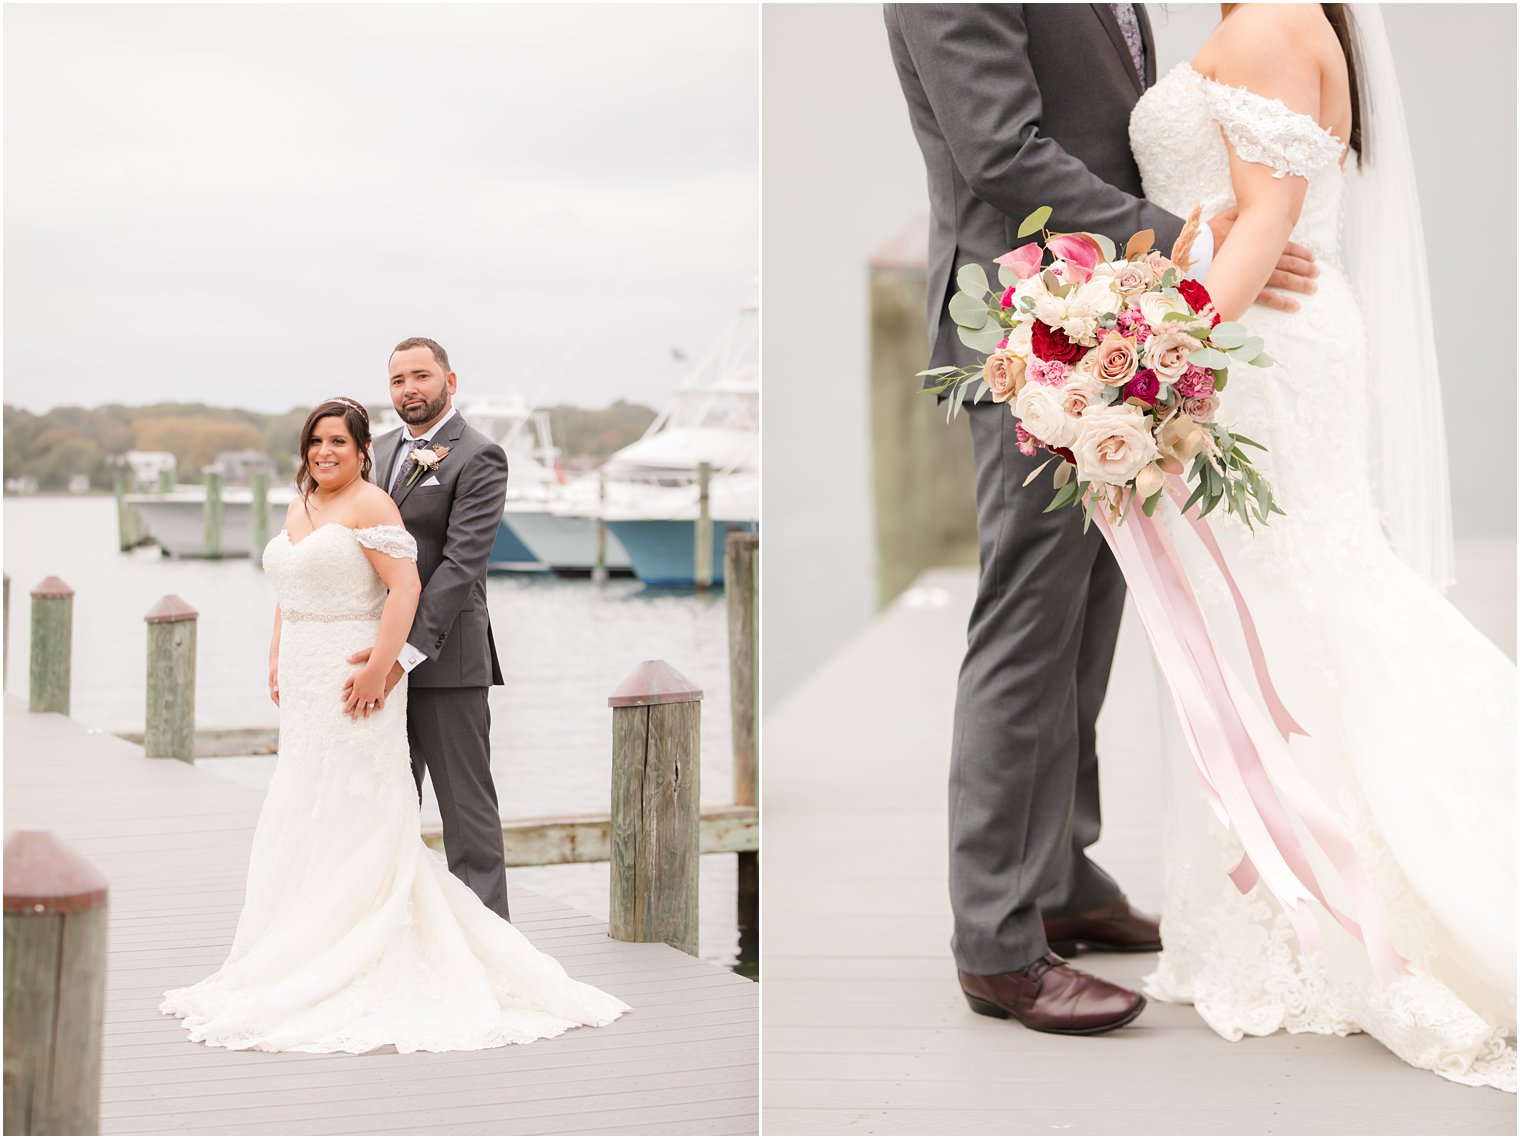 Clarks Landing wedding photos with Idalia Photography and florals by Narcissus Florals